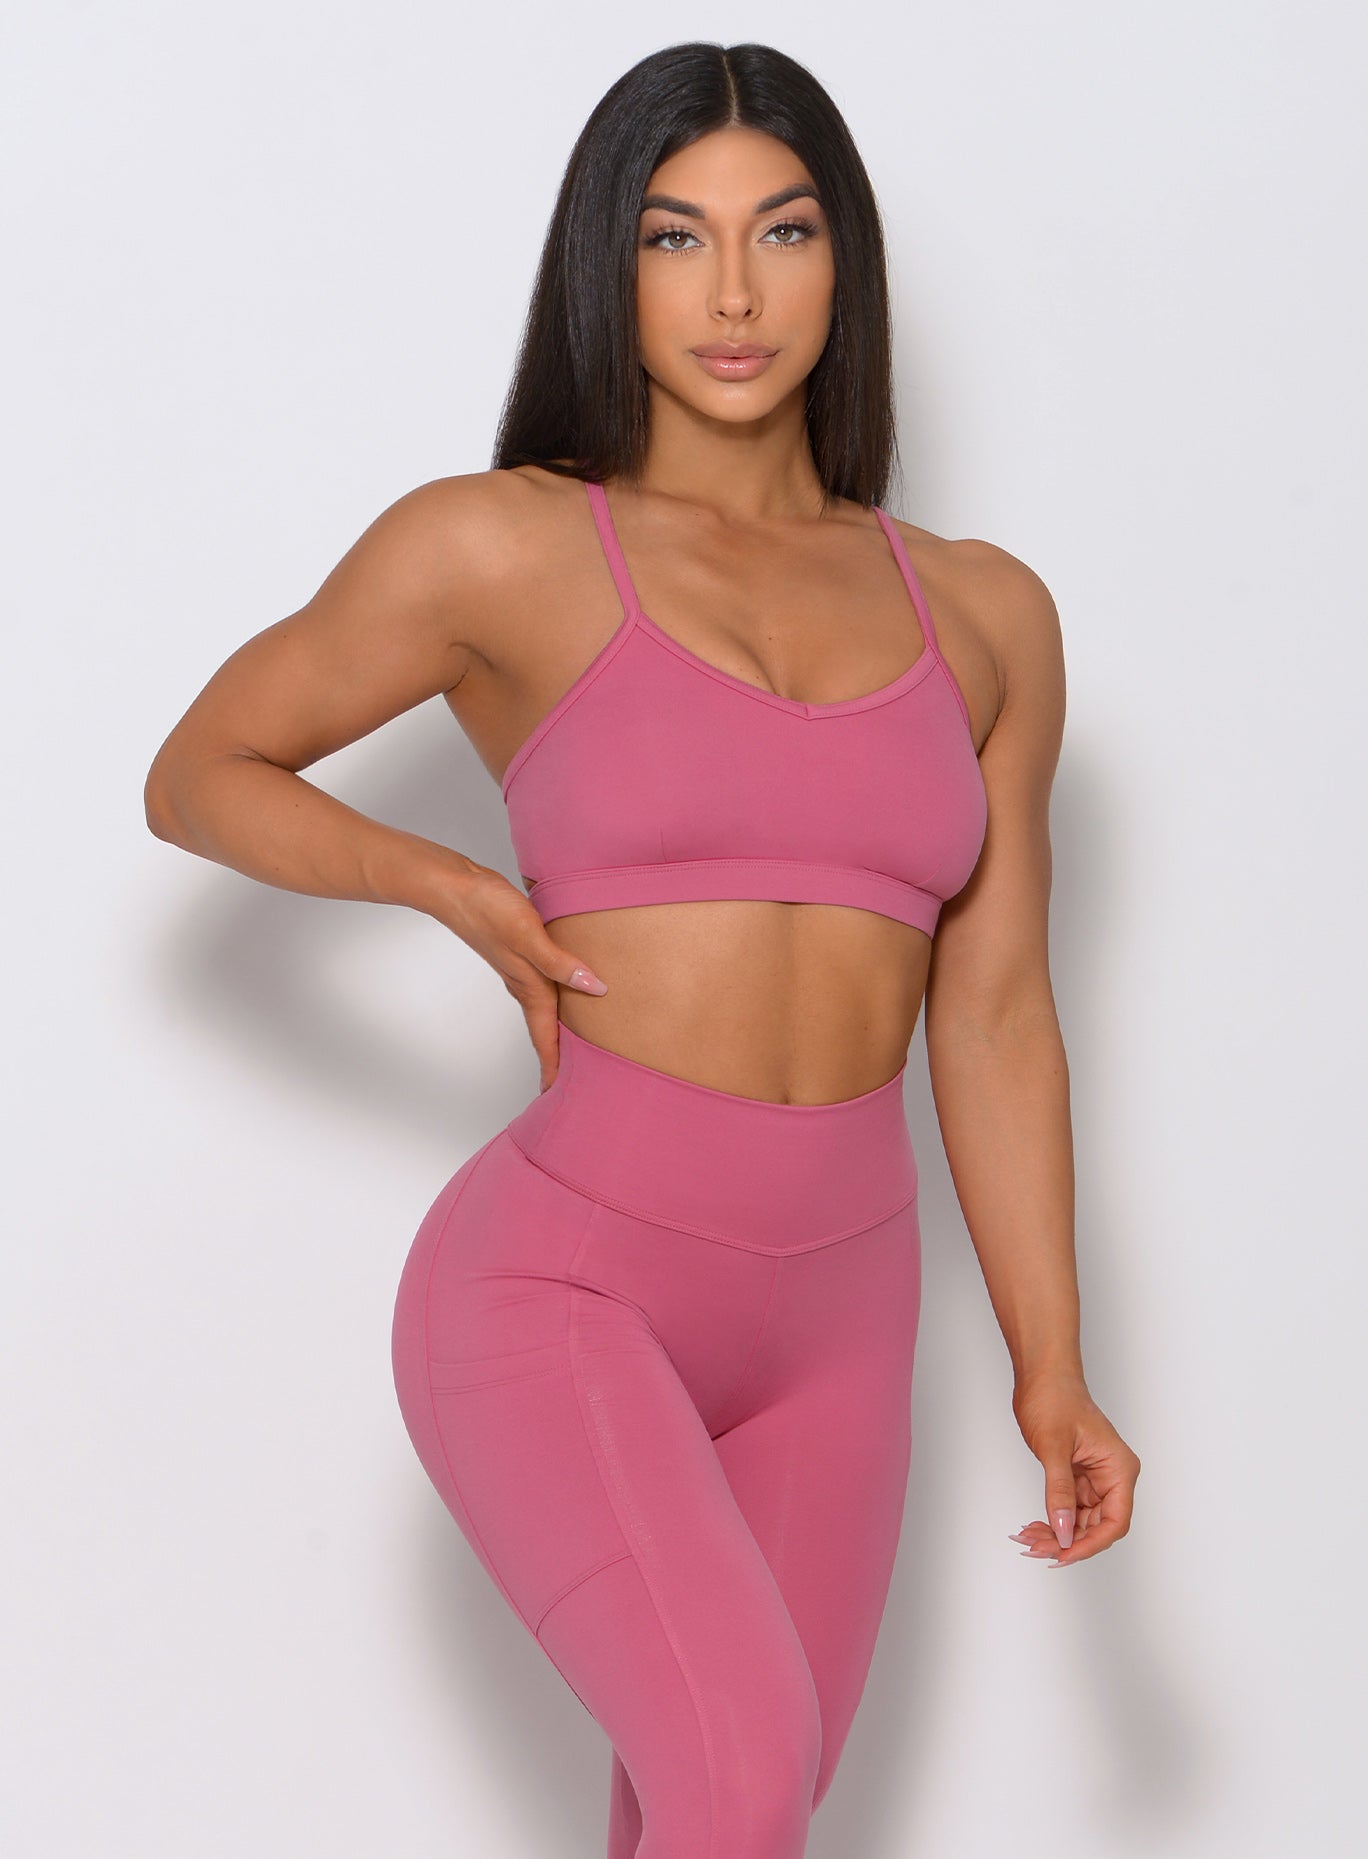 model facing forward with her right hand on waist wearing our pumped sports bra in blush color and a matching high waist leggings